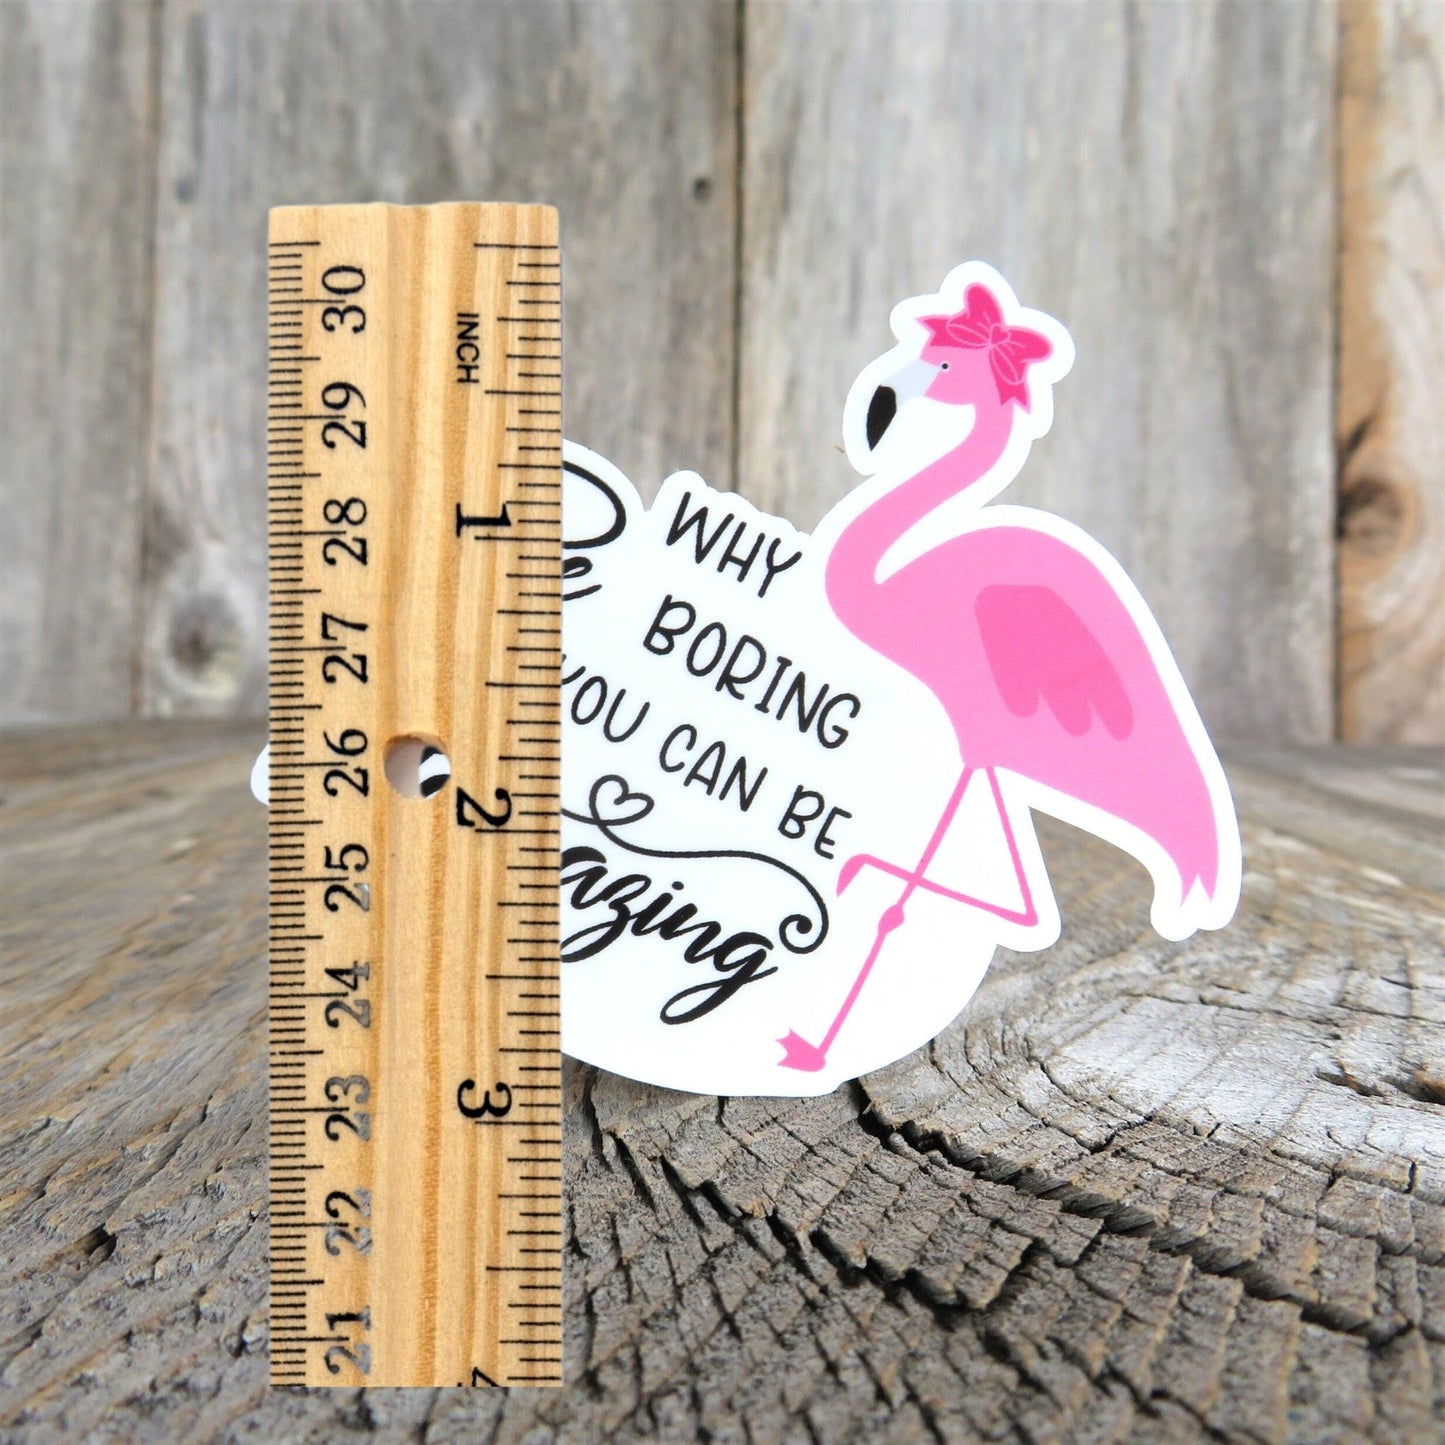 Funny Flamingo Sticker Why Be Boring When You Can BE Flamazing Full Color Waterproof Summer Be an Original